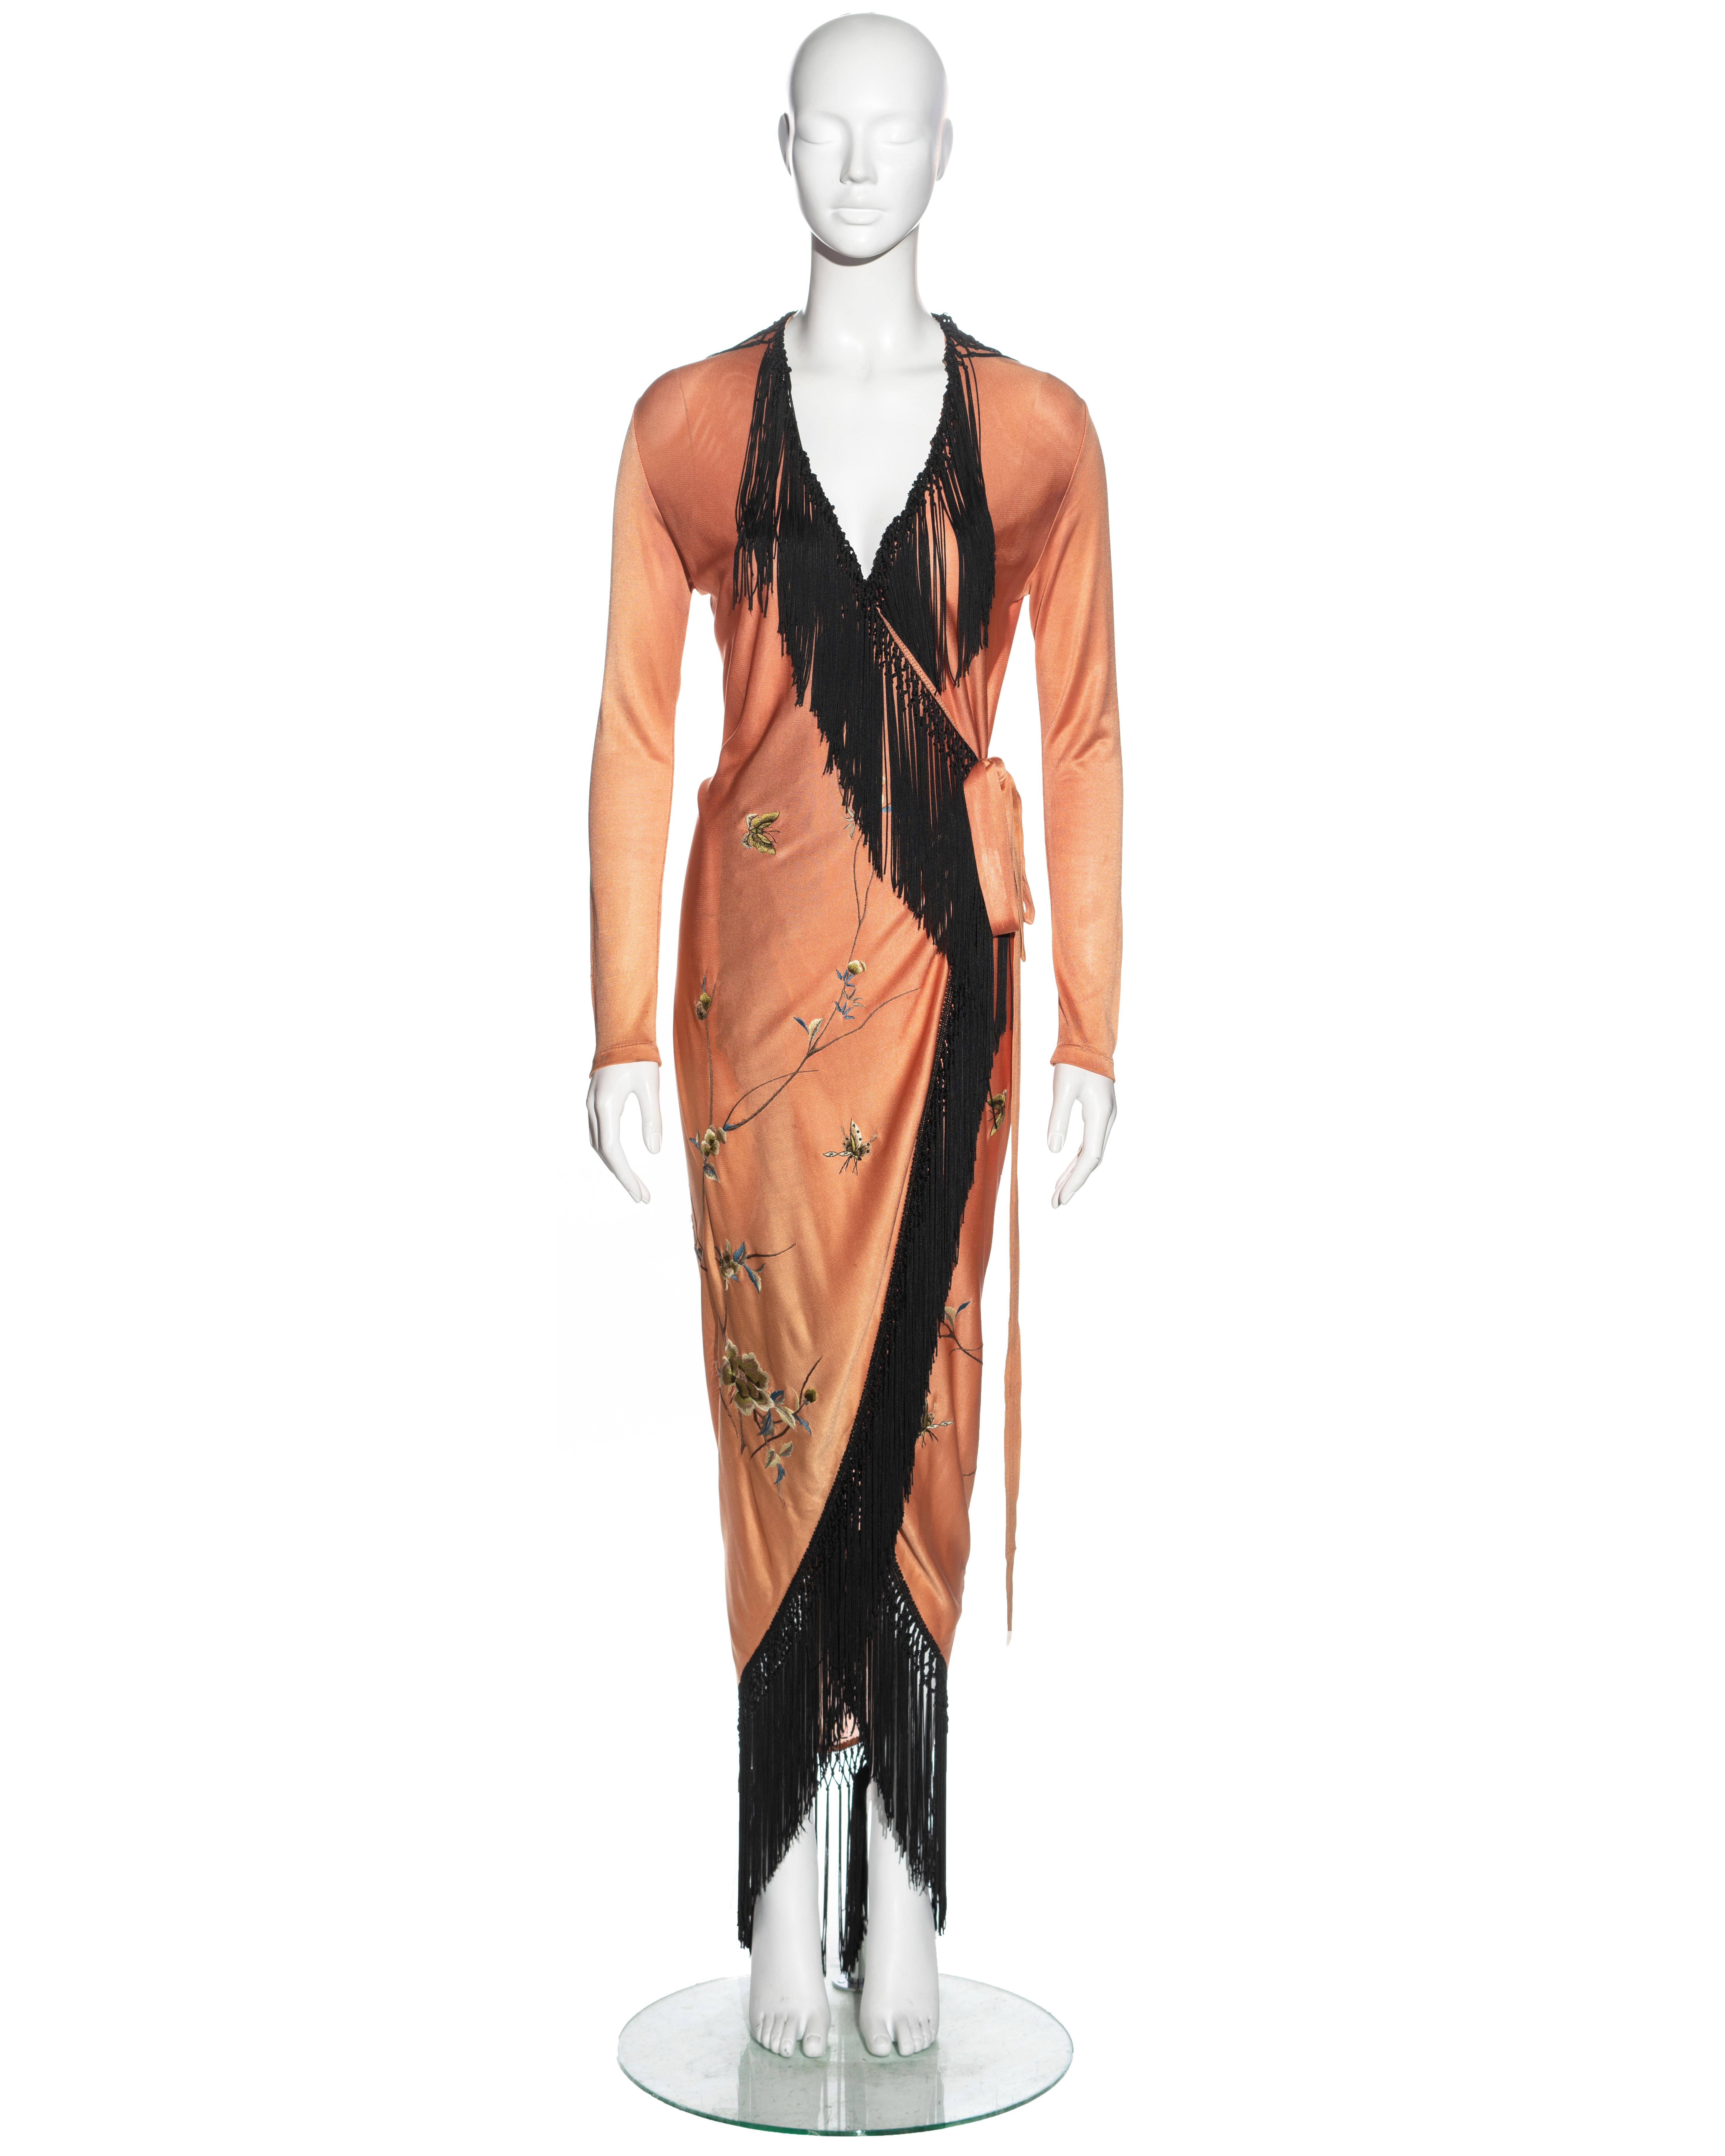 ▪ Jean Paul Gaultier wrap dress
▪ Sold by One of a Kind Archive
▪ Constructed from a pale peach viscose knitted fabric 
▪ Hand-knotted black silk fringes 
▪ Floral embroidery 
▪ Wrap fastening with two waist ties at the waist 
▪ Size IT 42 - FR 38 -